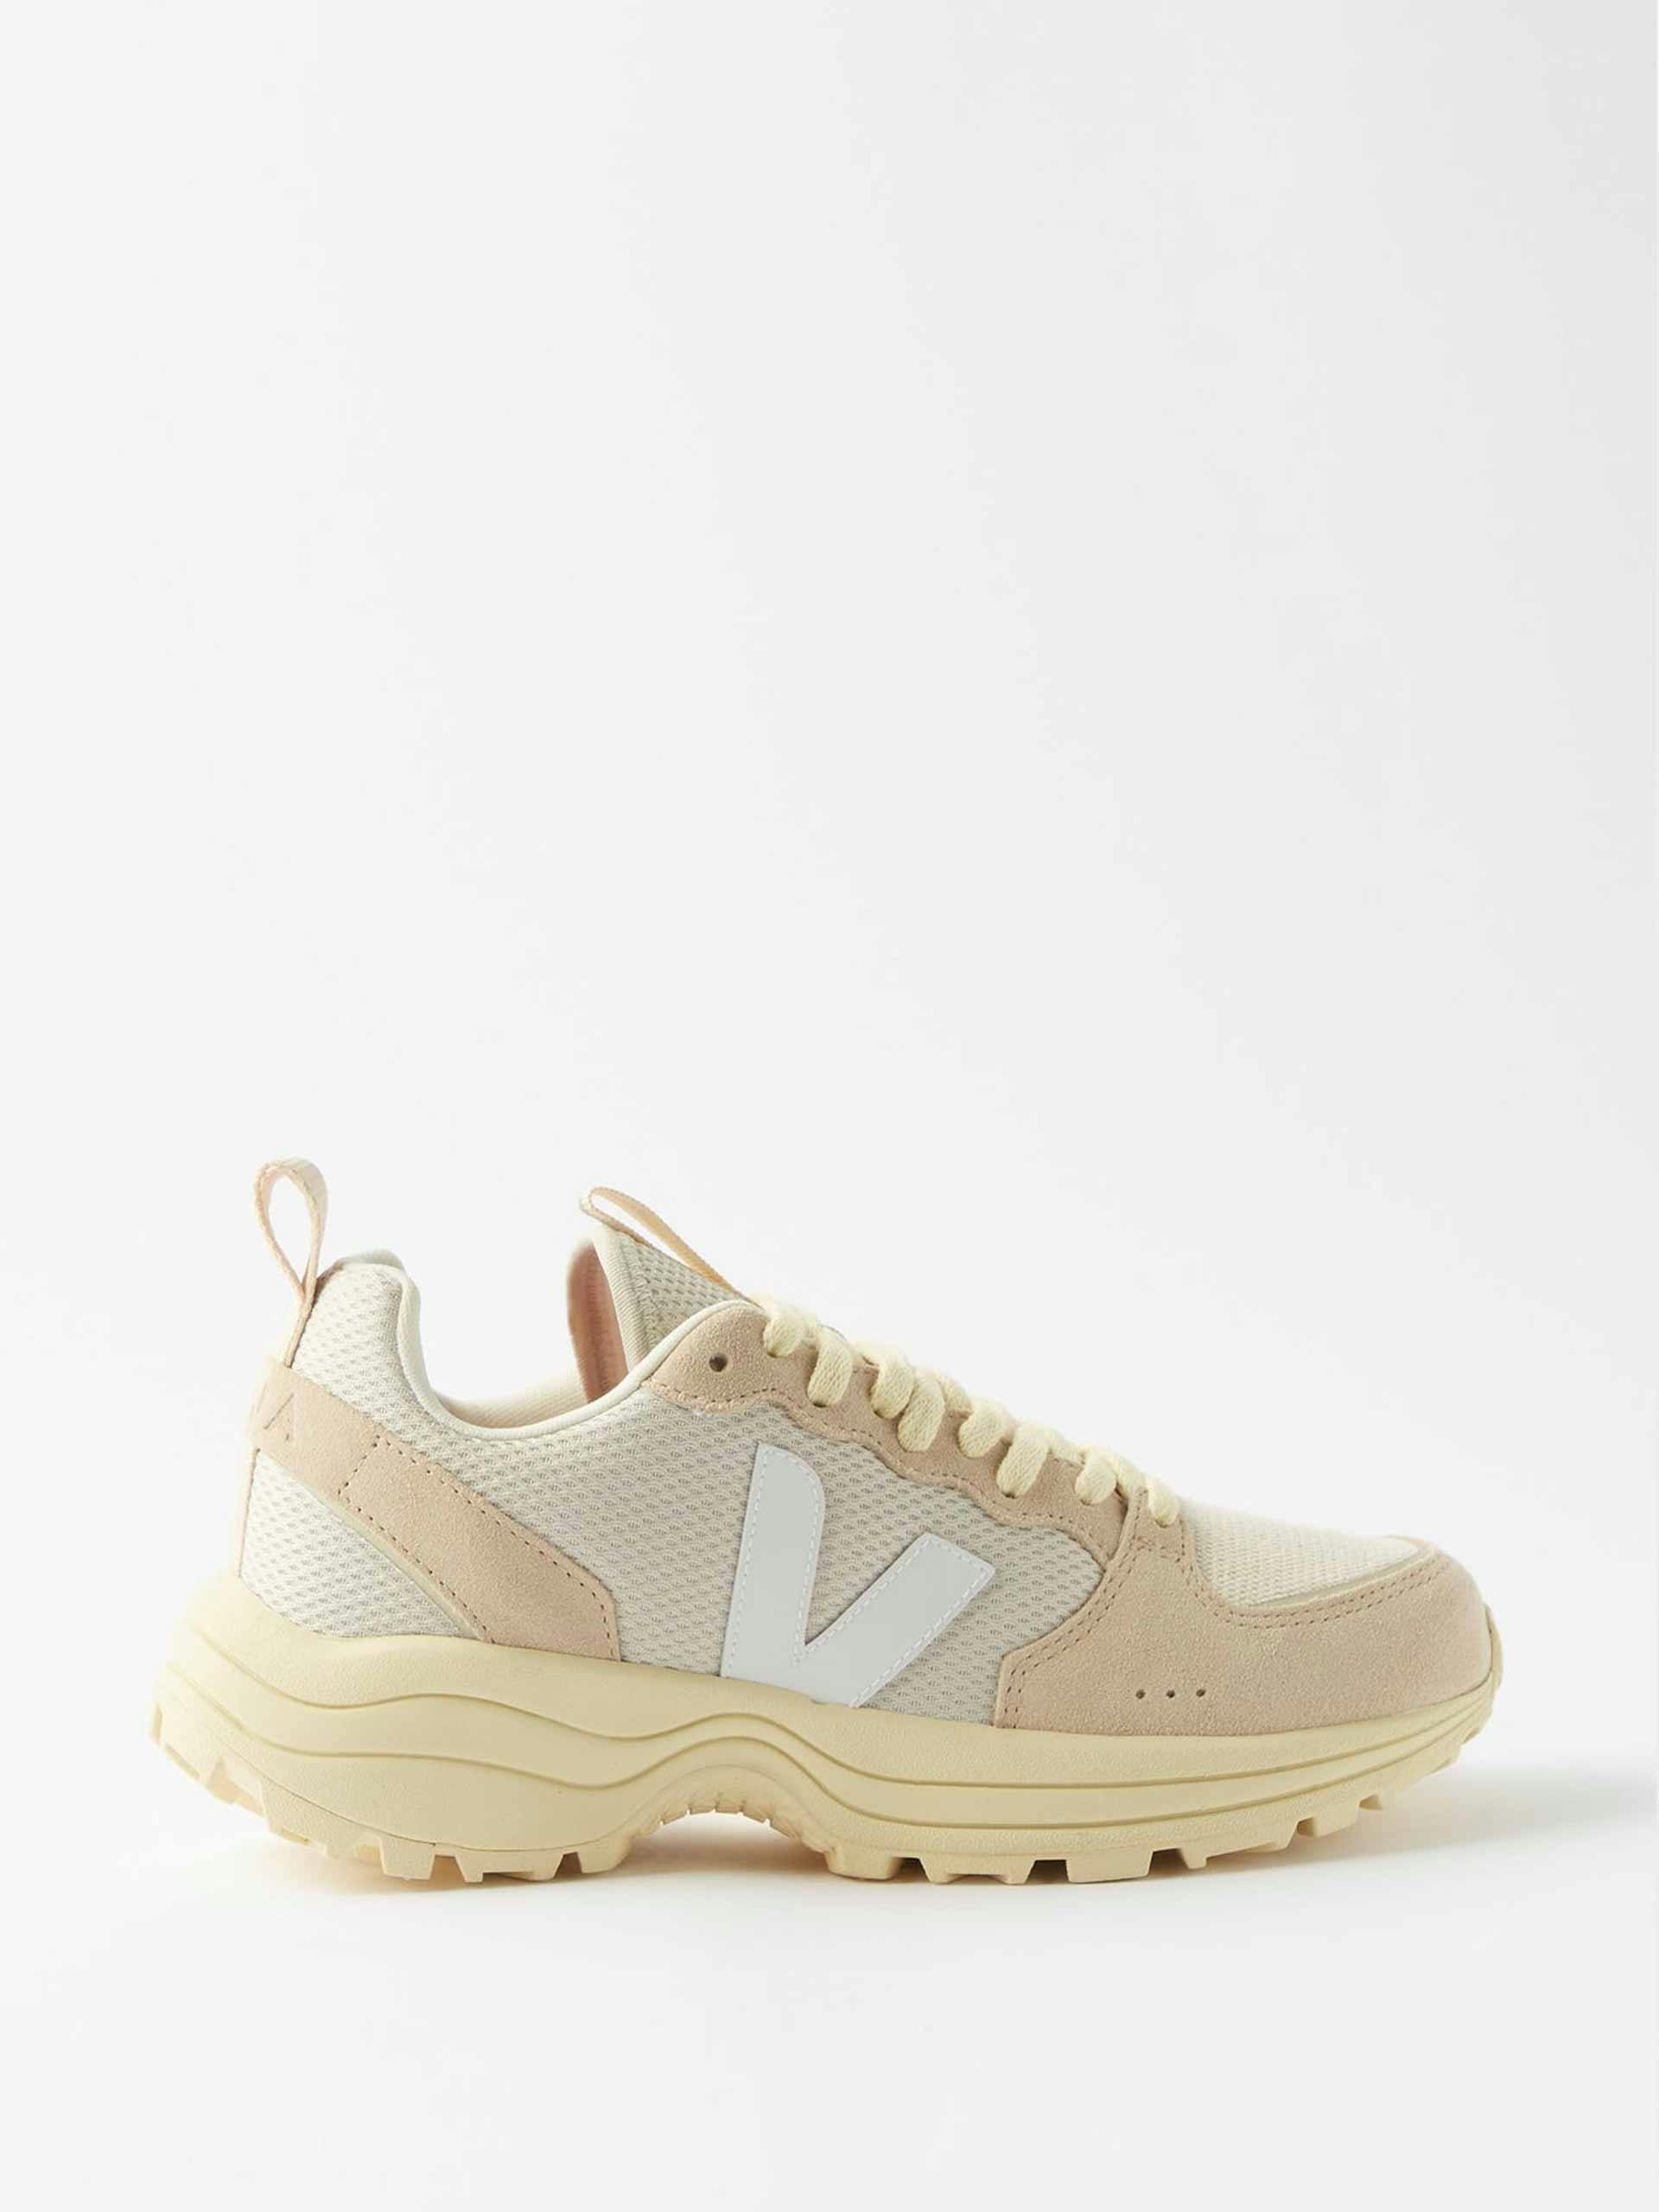 Beige mesh and suede trainers